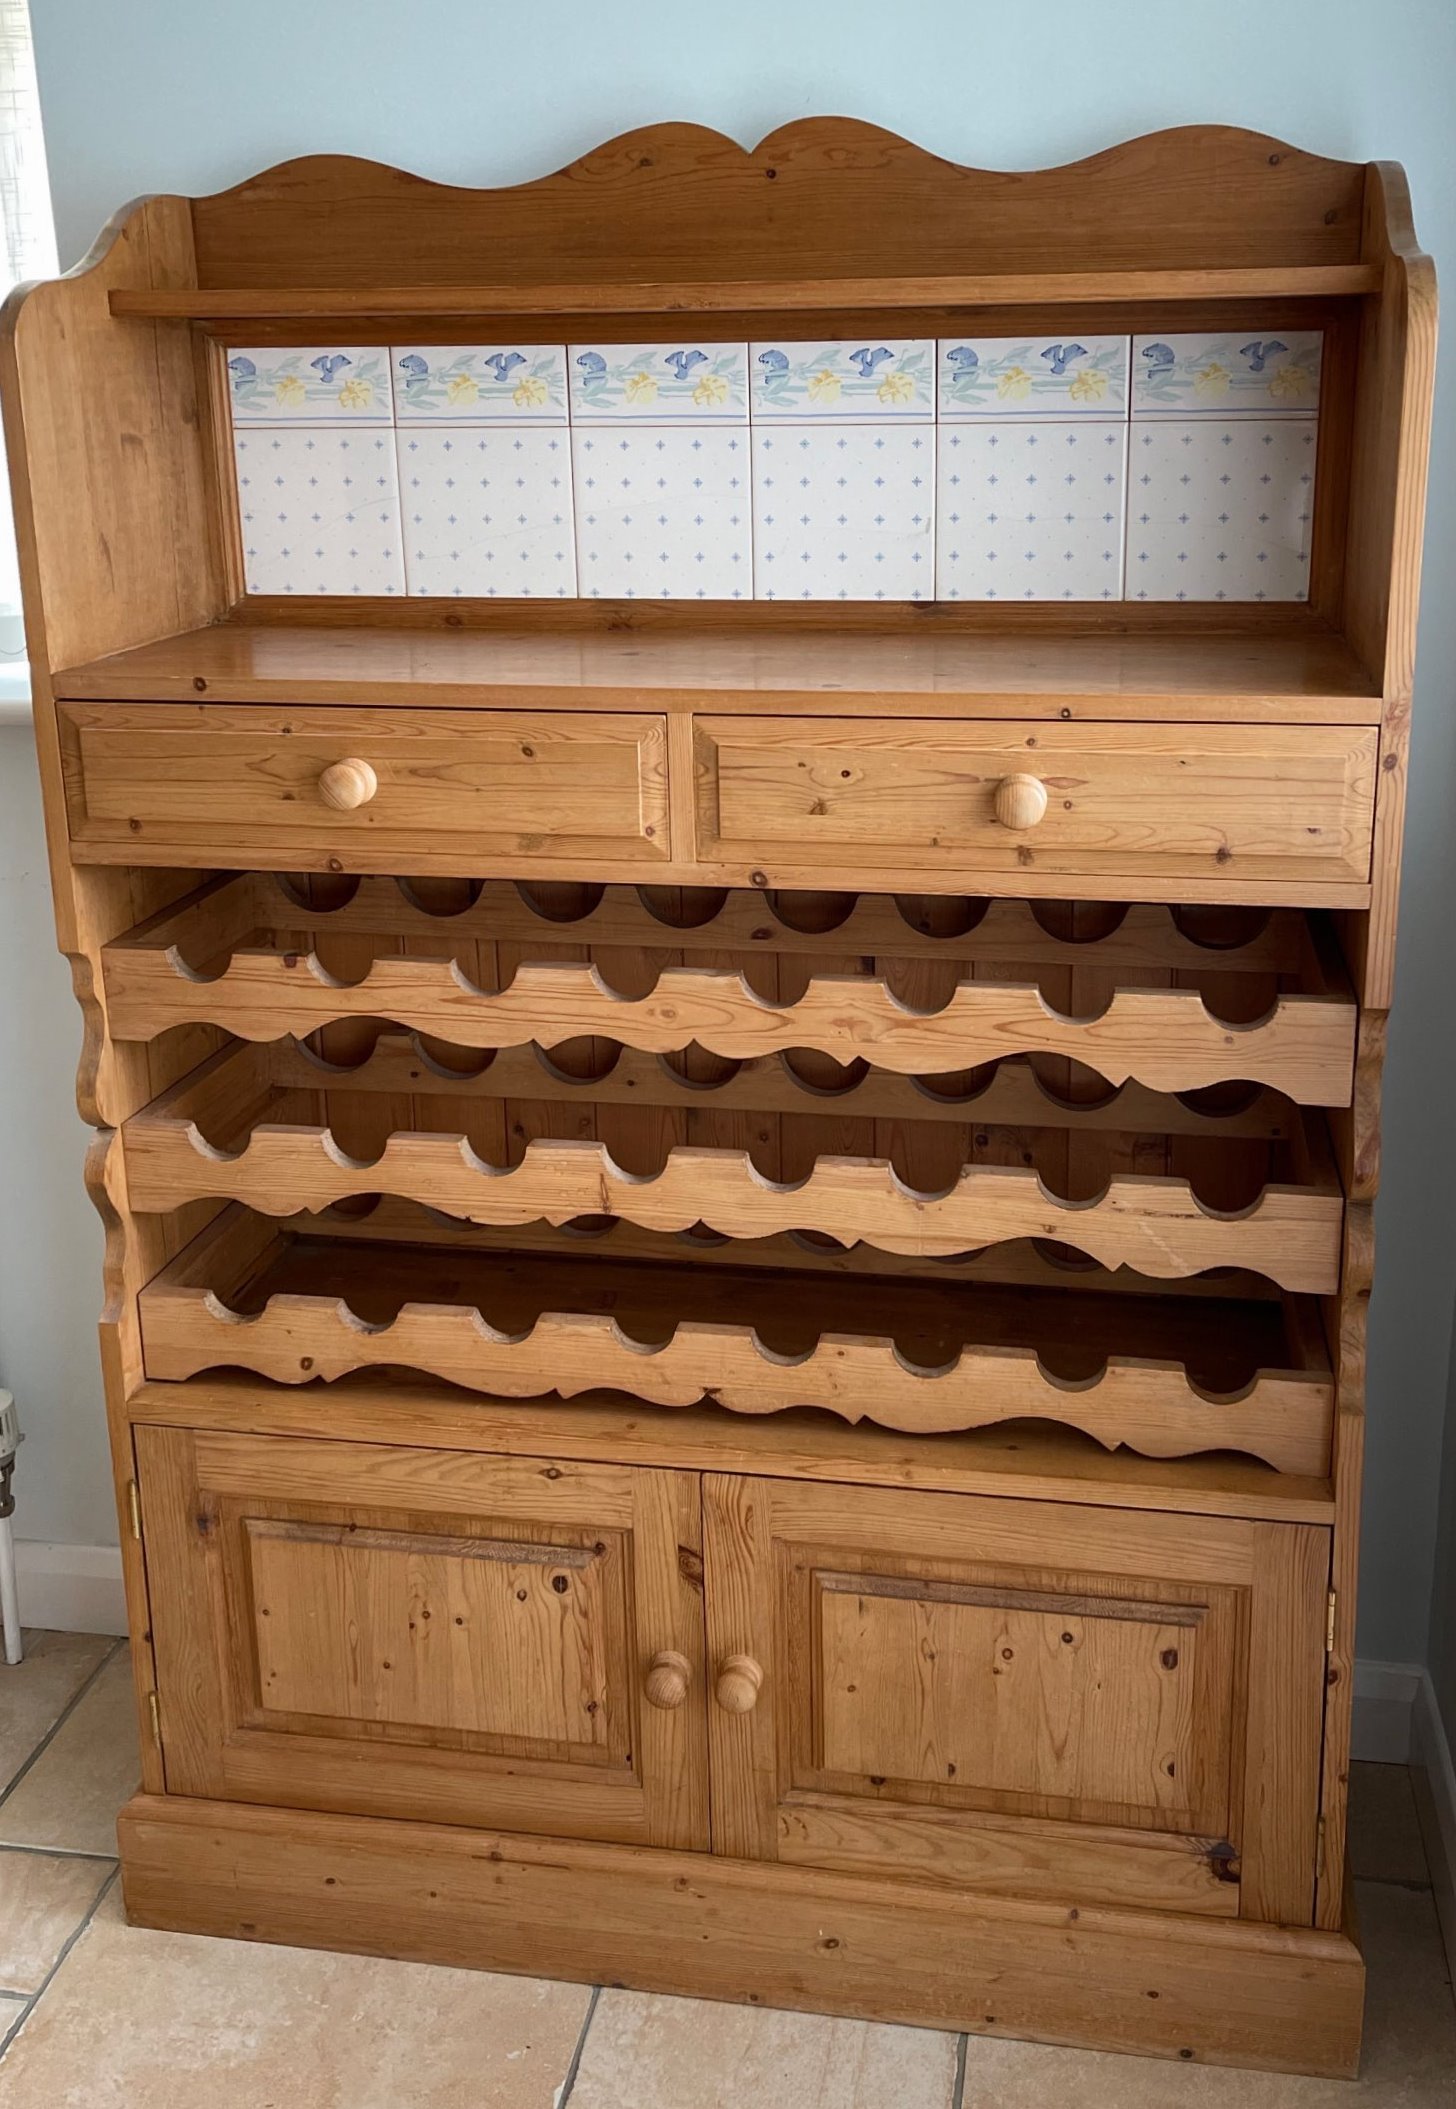 A pine tile inset kitchen cabinet with an in-built wine rack, 100 x 150cm. Condition: some tiles A/